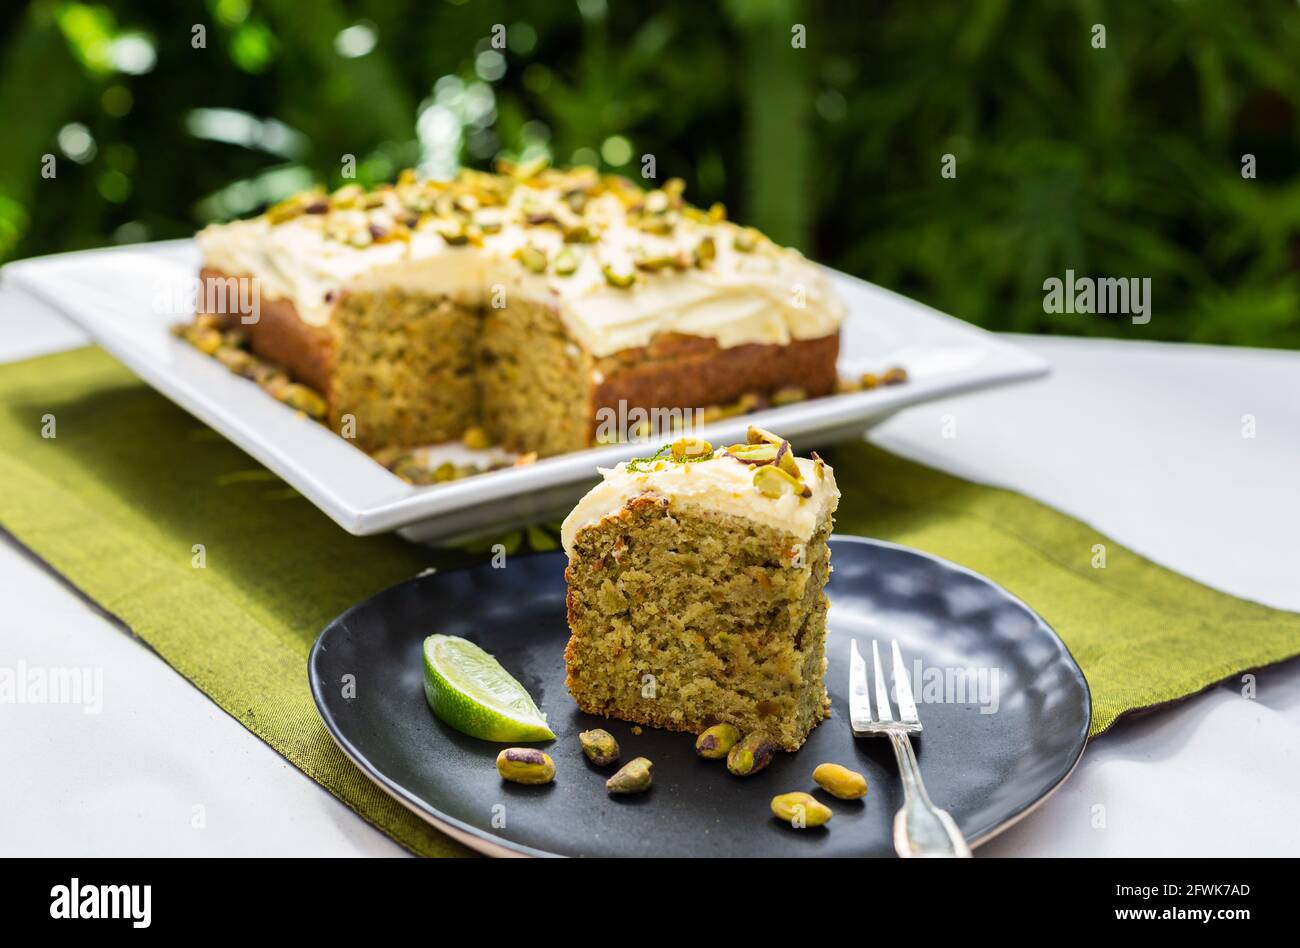 homemade, snack, baked, lime and pistachio cake, nobody, outdoors, on one, splade, table, gourmet, cooked, fresh, tasty, delicious, cake, cream, decor Stock Photo